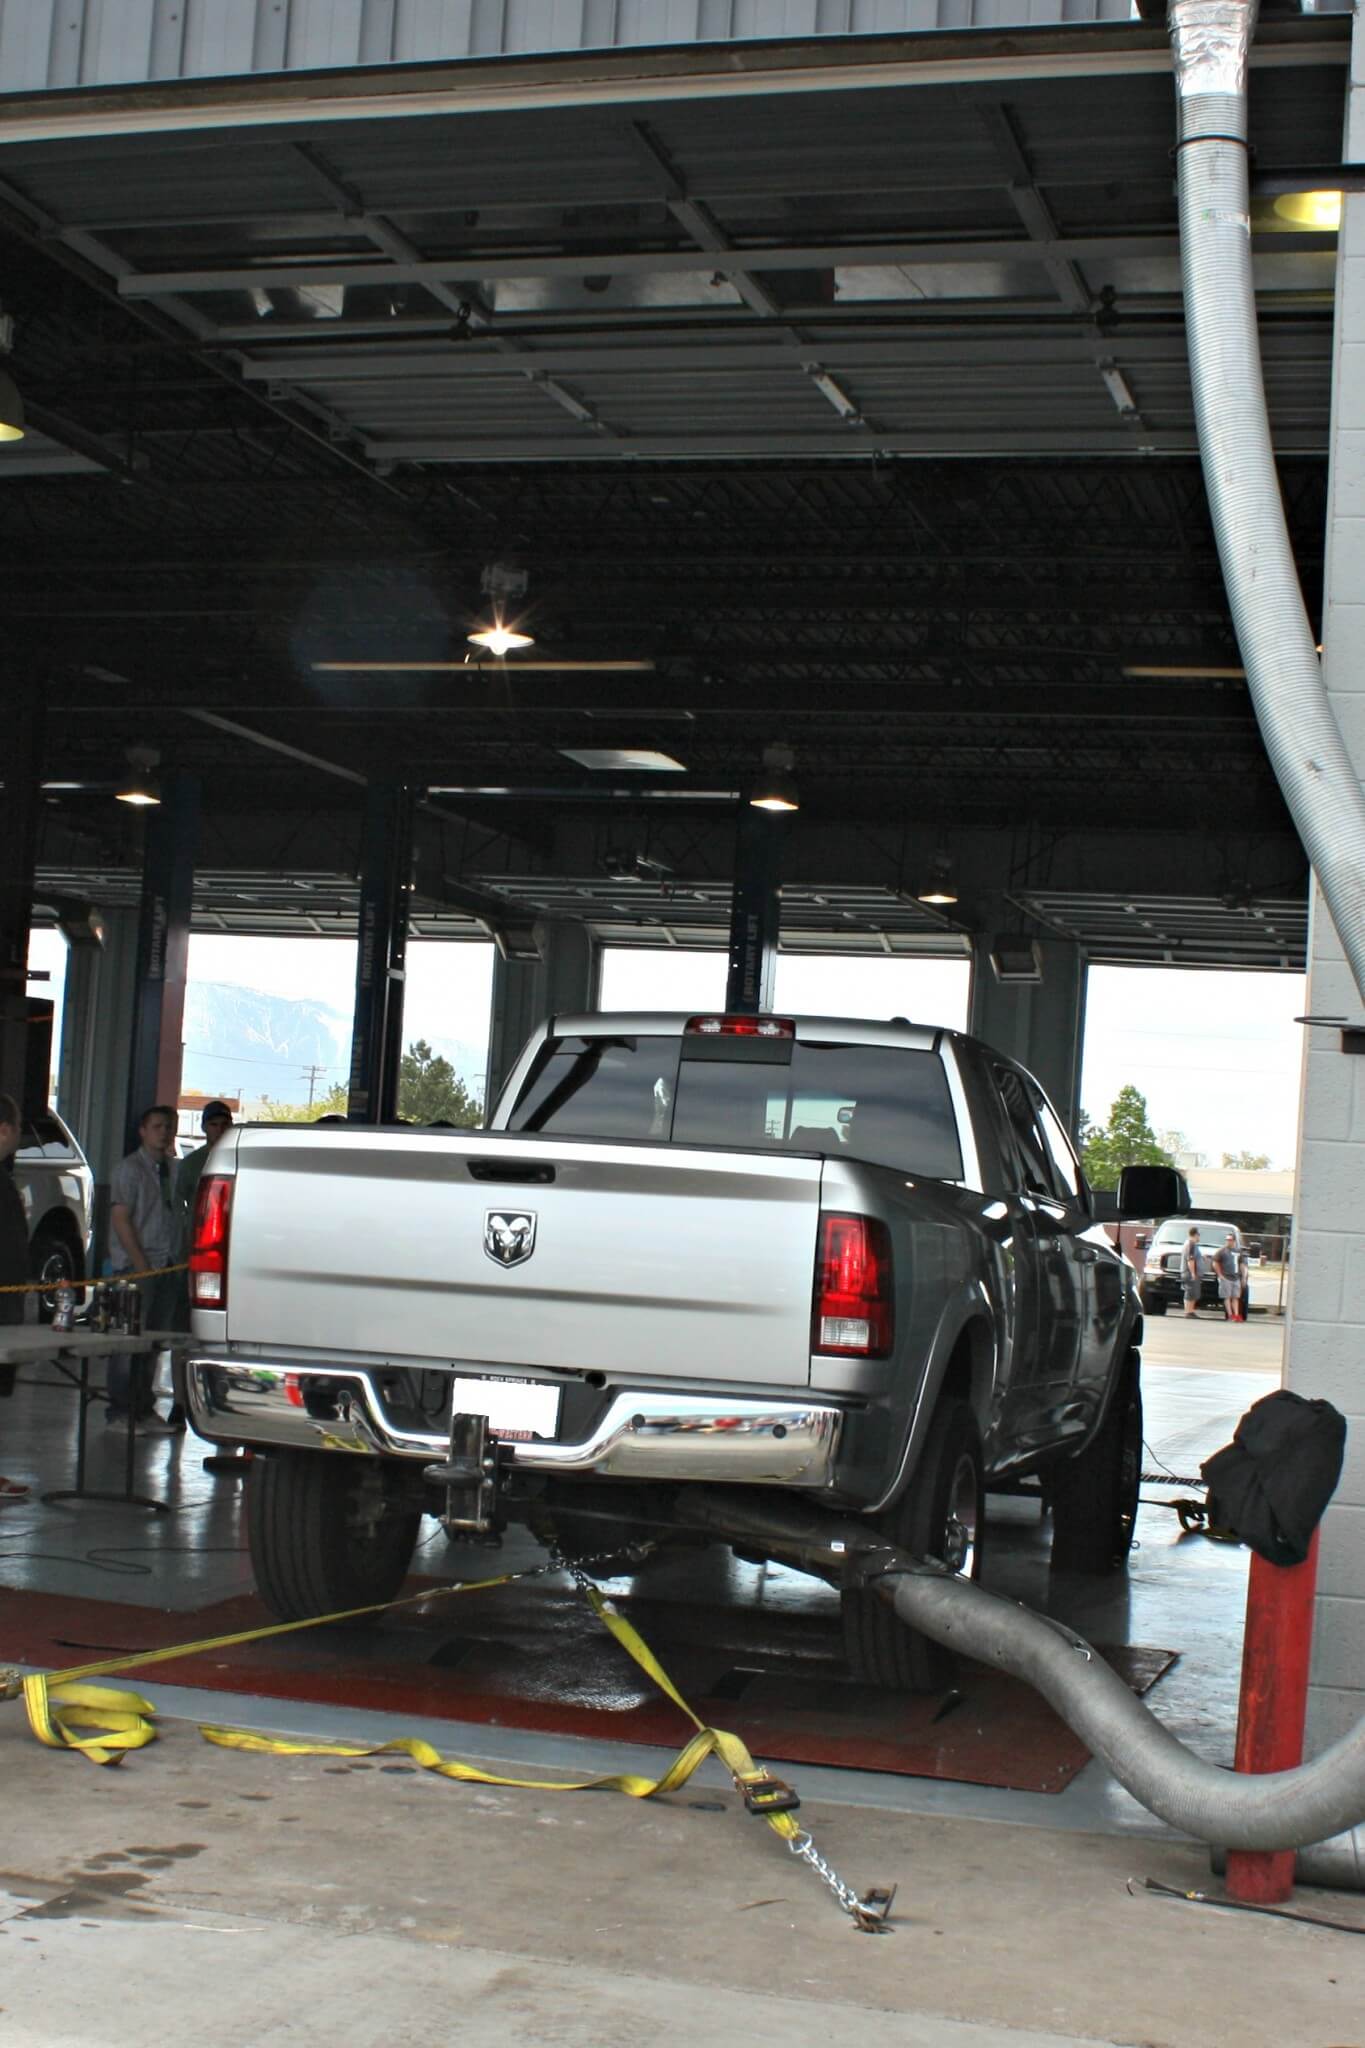 The in-floor dyno at Industrial Injection was used for the Stock and Single Turbo classes and stayed busy all day long. More than 40 trucks were strapped down to be tested. This 2013 Ram owned by Jason Stott of Addicted Diesel managed to break the 500-hp mark with some simple tuning and a modified stock turbo. The truck looks to have a great combination of parts that work well on the street and dyno, as well as for towing when towing or for sled pull competitions. 